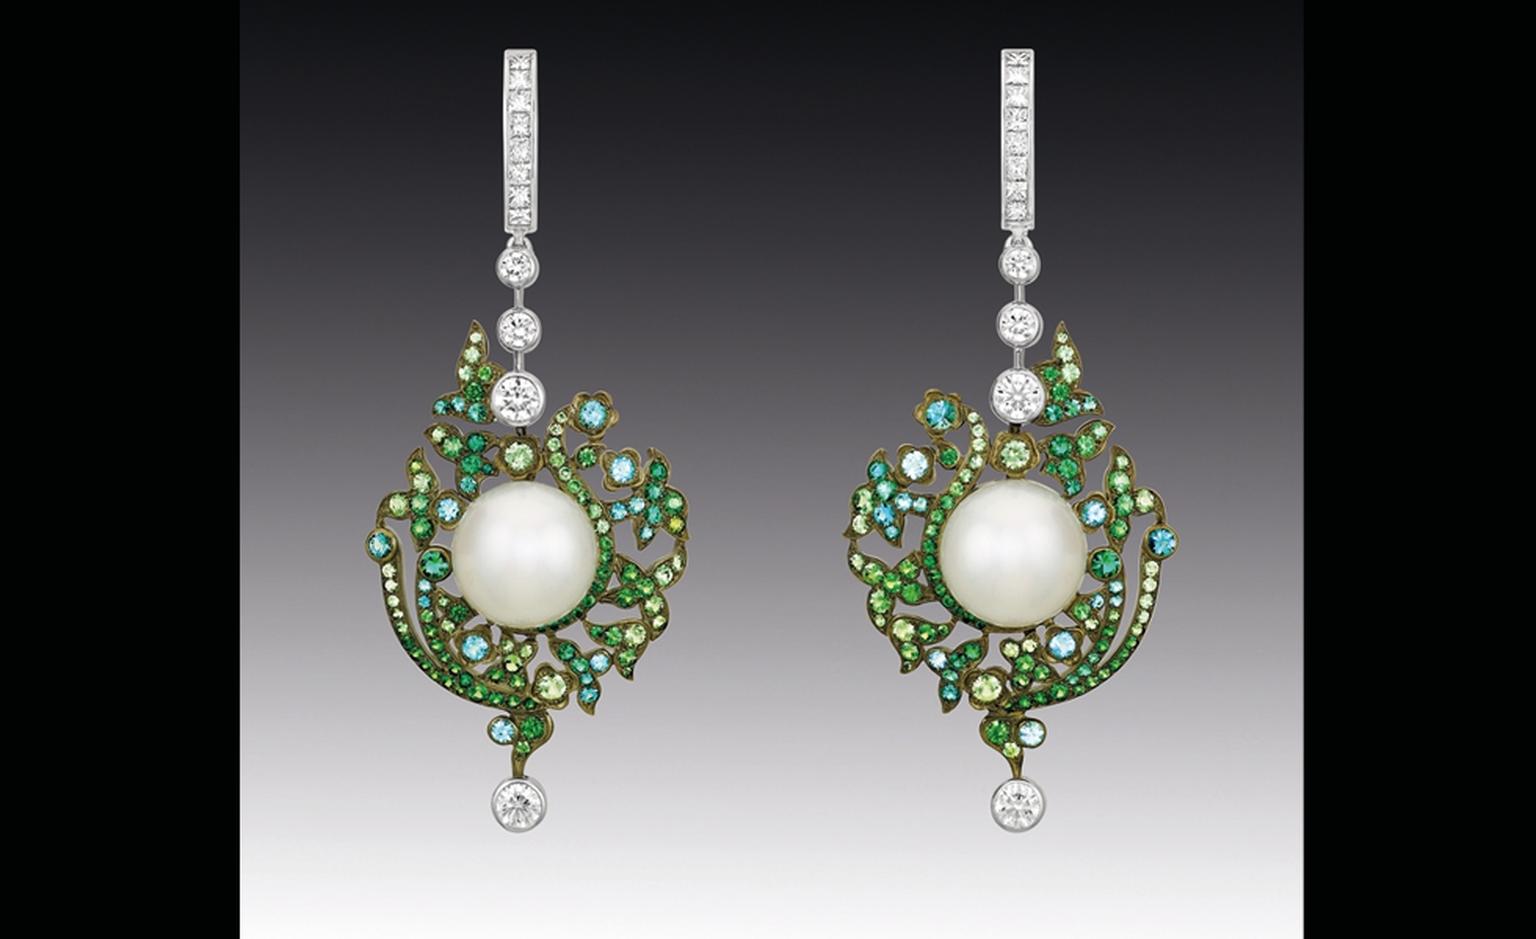 Chanel Contrastes collection: Jardin d'Hiver. Earrings in